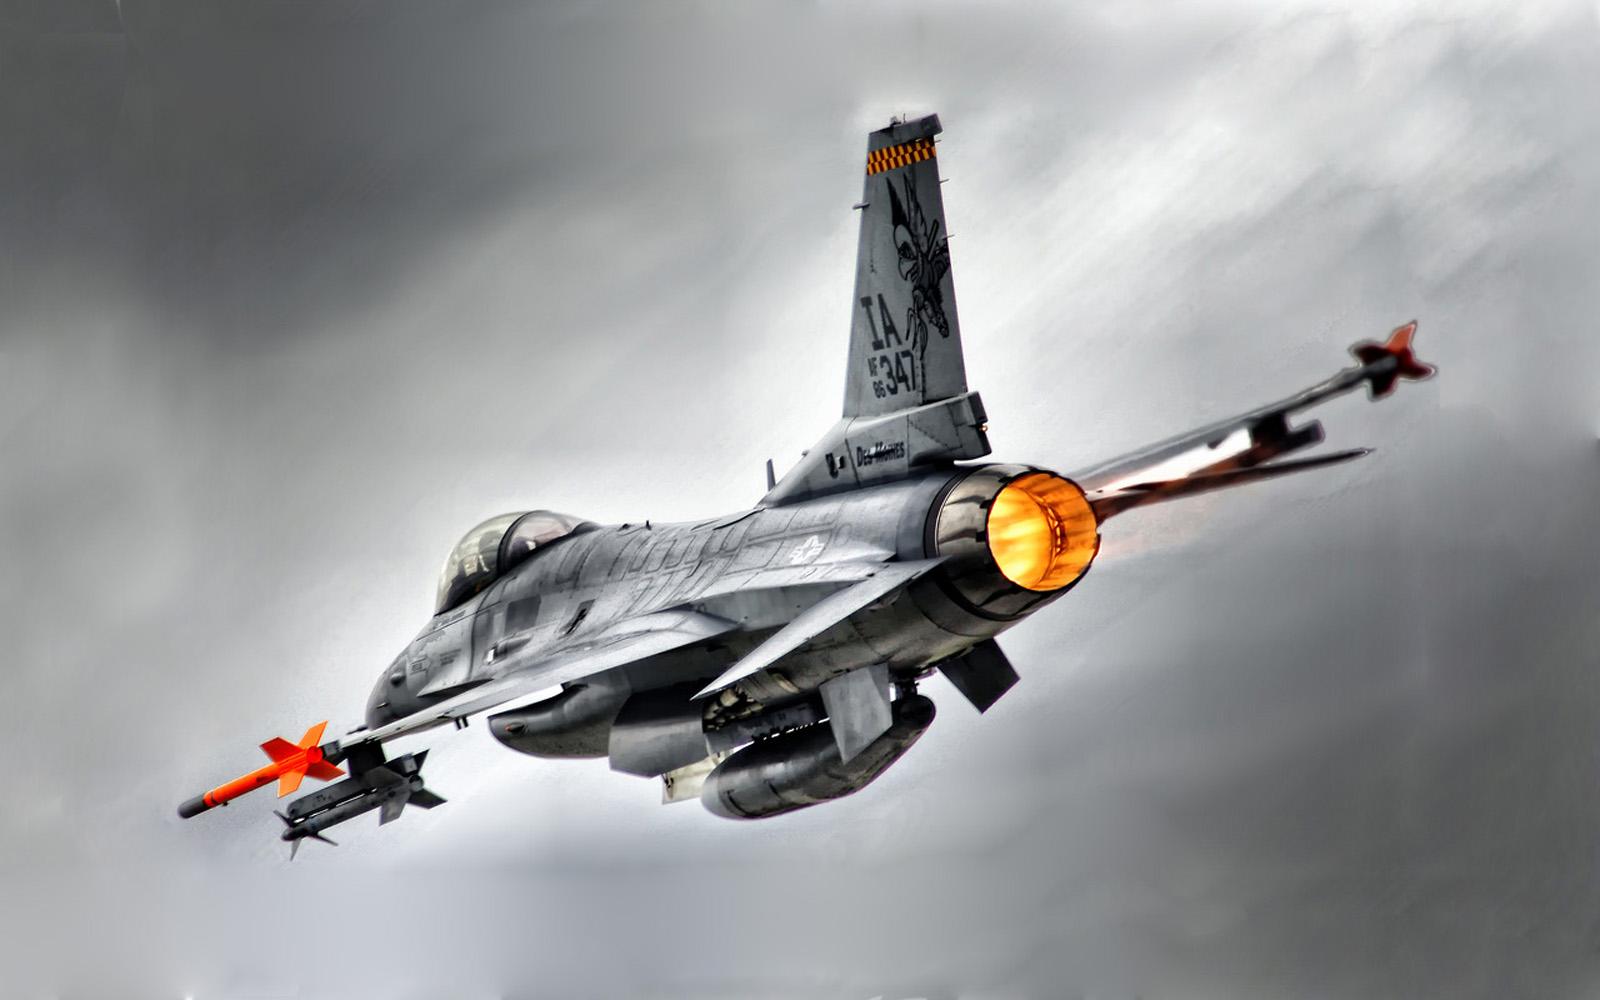 General Dynamics F 16 Fighting Falcon Wallpaper High Quality Is 4K